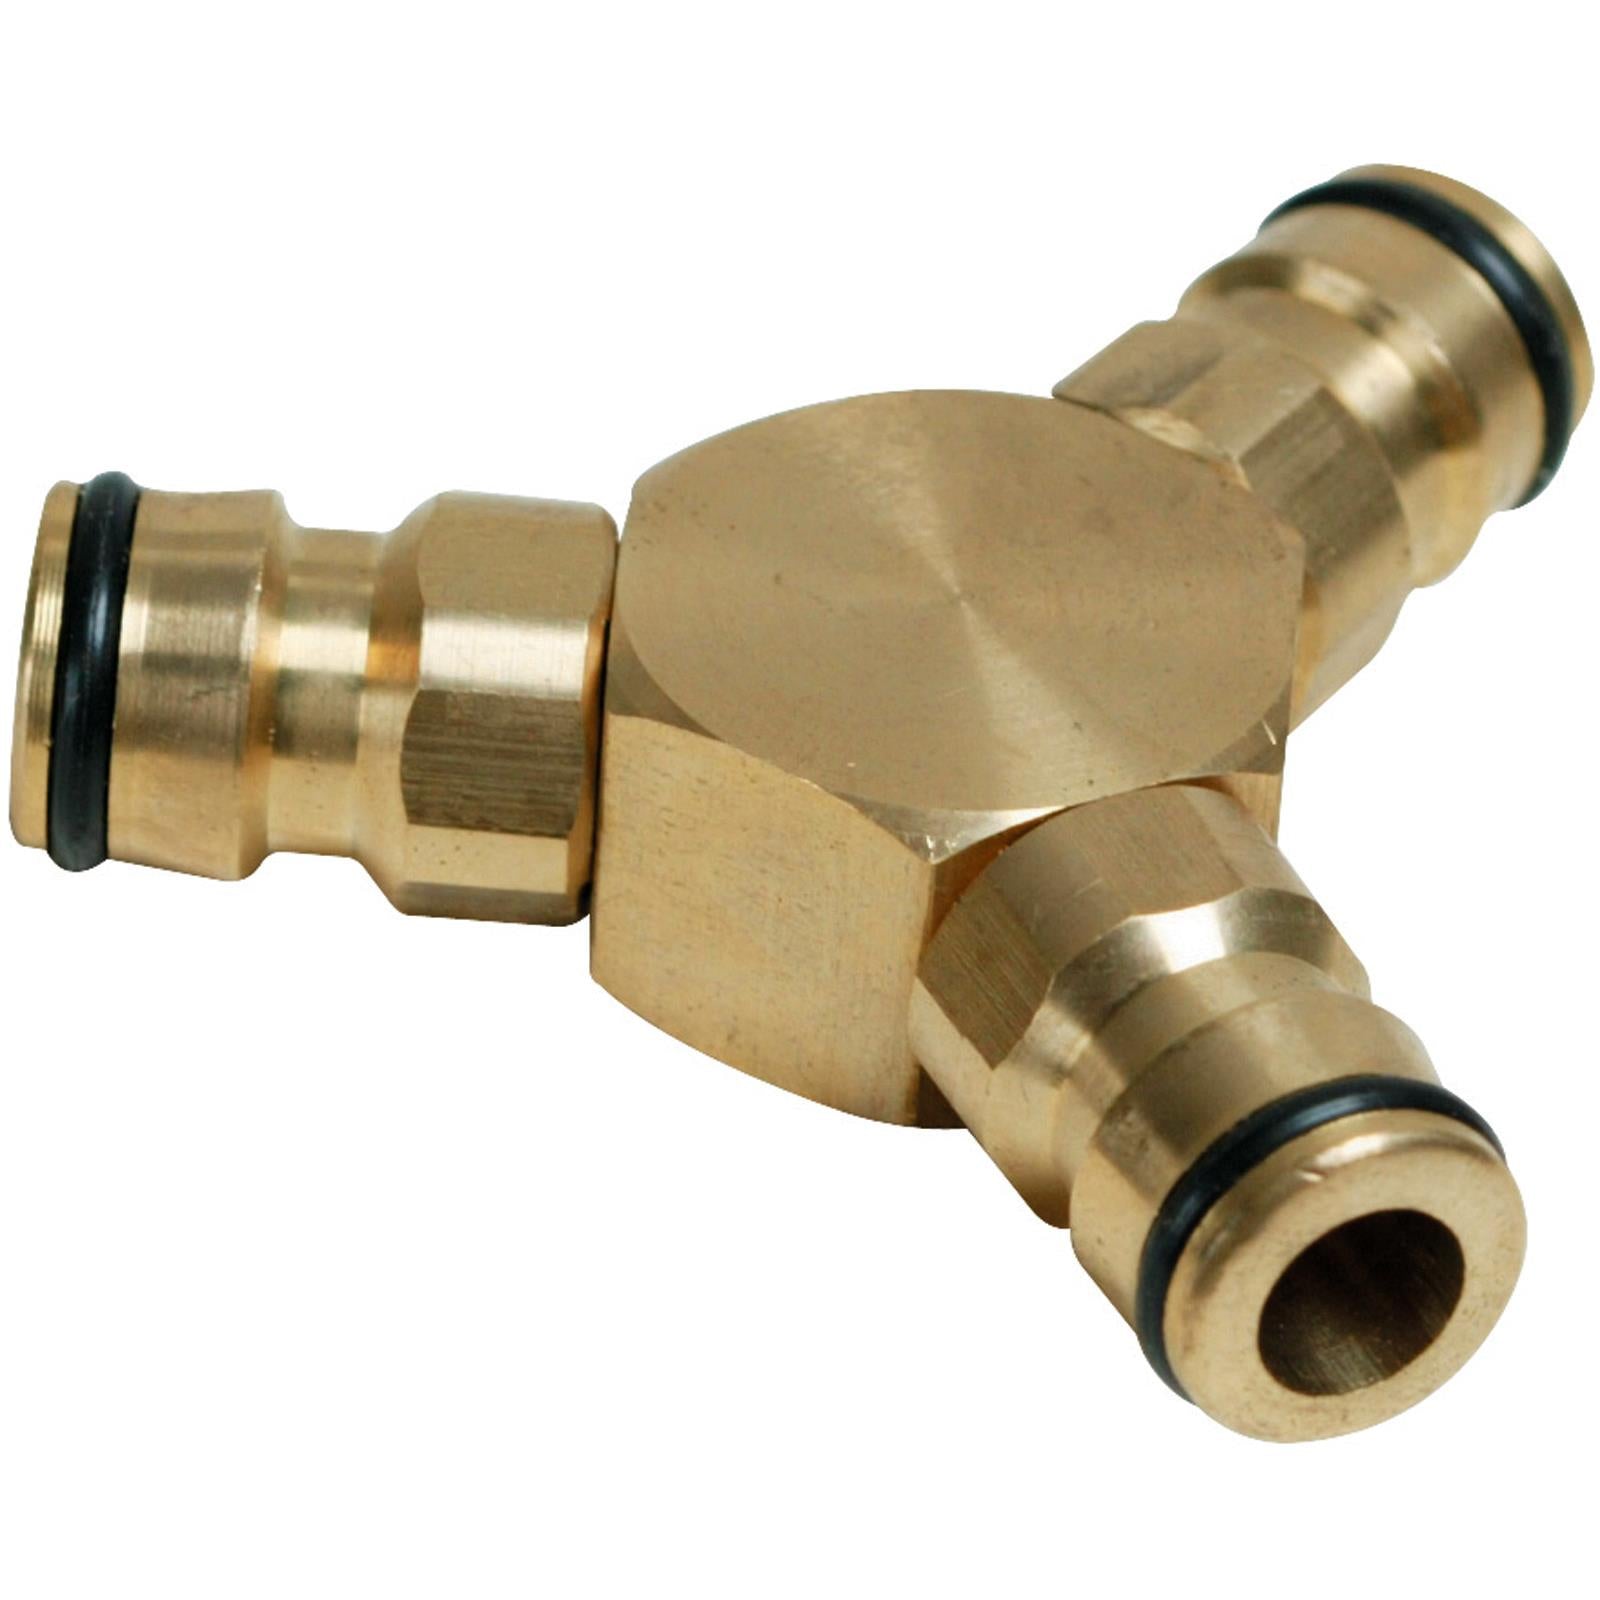 Silverline 1/2" Brass 3 Way Male Connector Quick Connect Gardening Tap